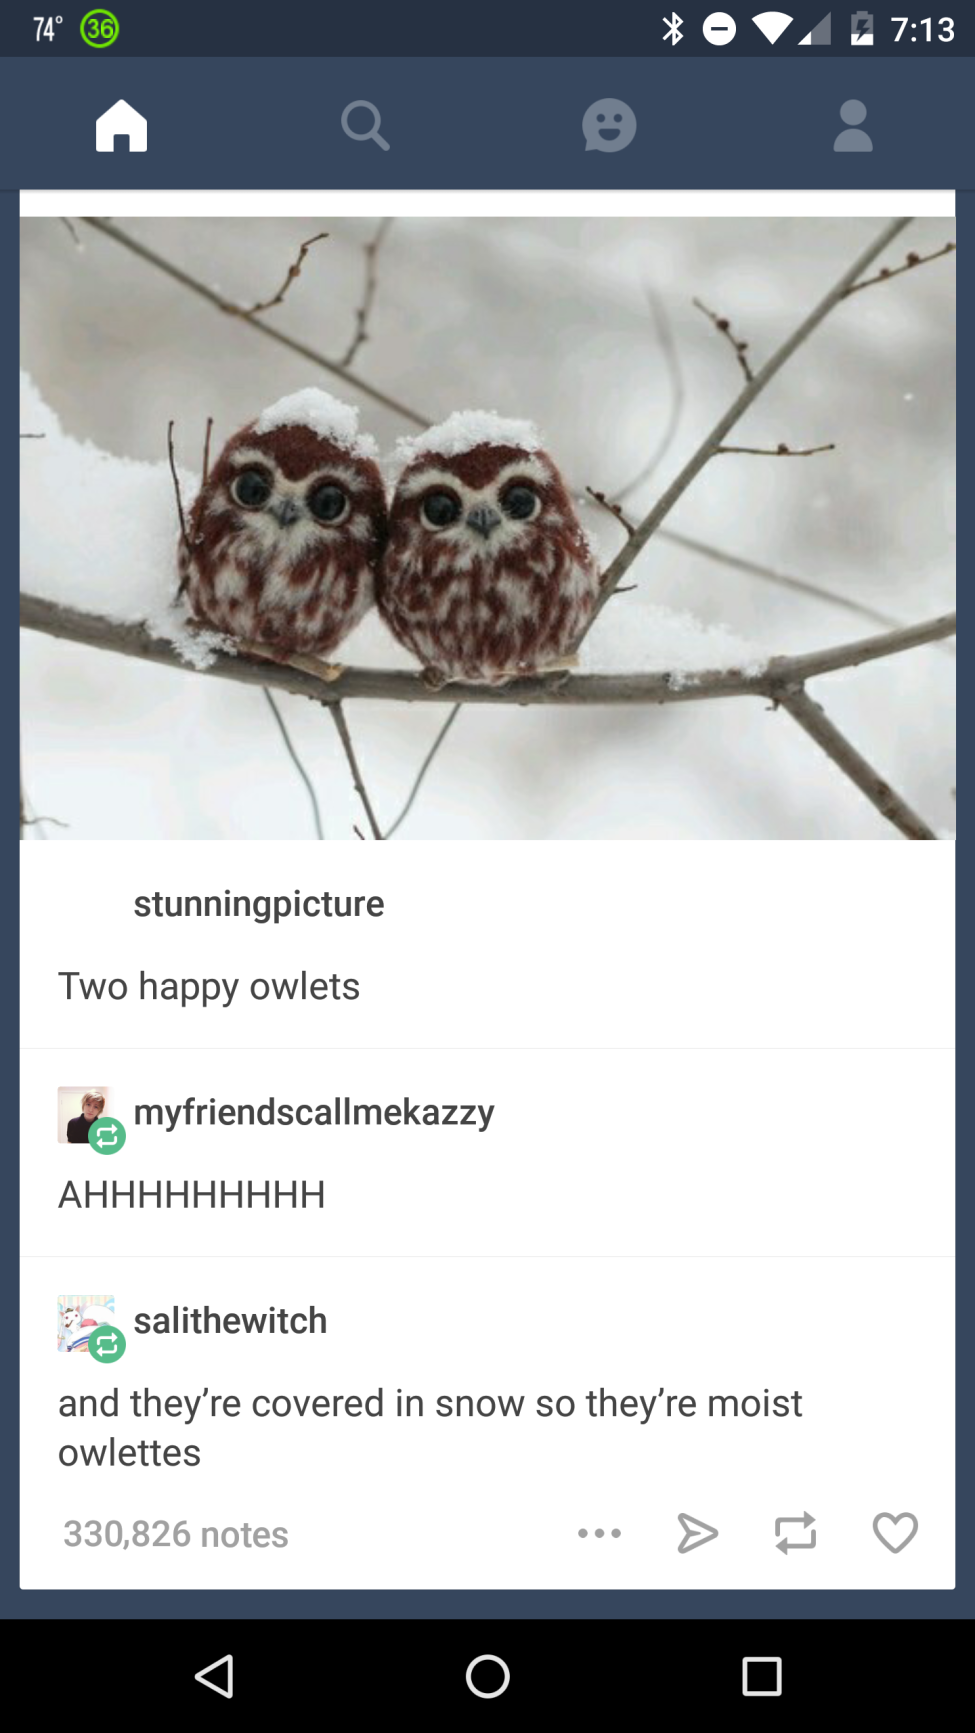 tumblr - baby owl - 74 o stunningpicture Two happy owlets myfriendscallmekazzy Ahhhhhhhhh sasalithewitch and they're covered in snow so they're moist owlettes 330,826 notes